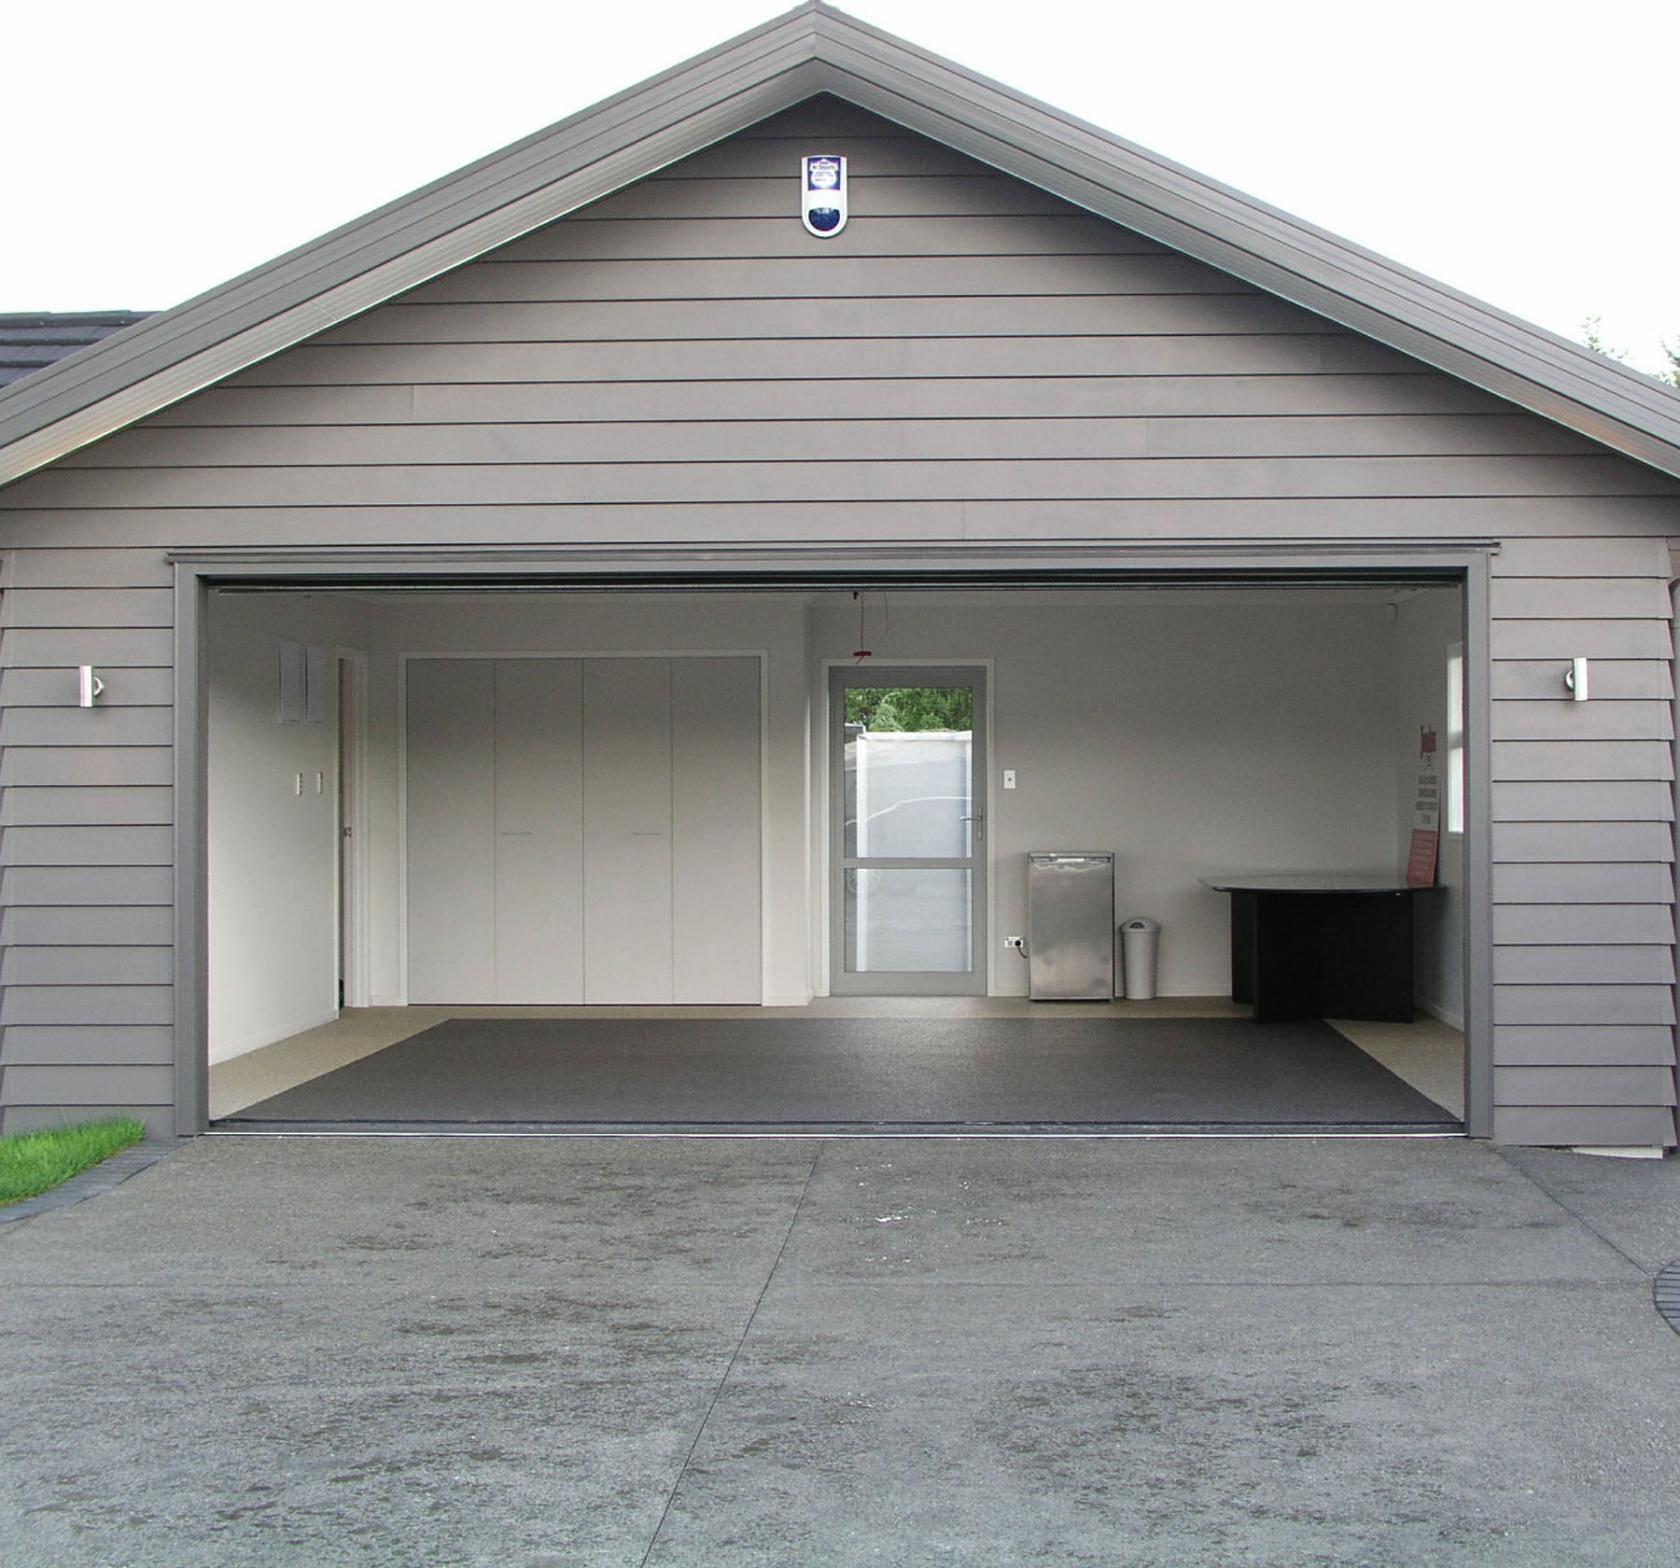 Tips for Keeping Garage Cool